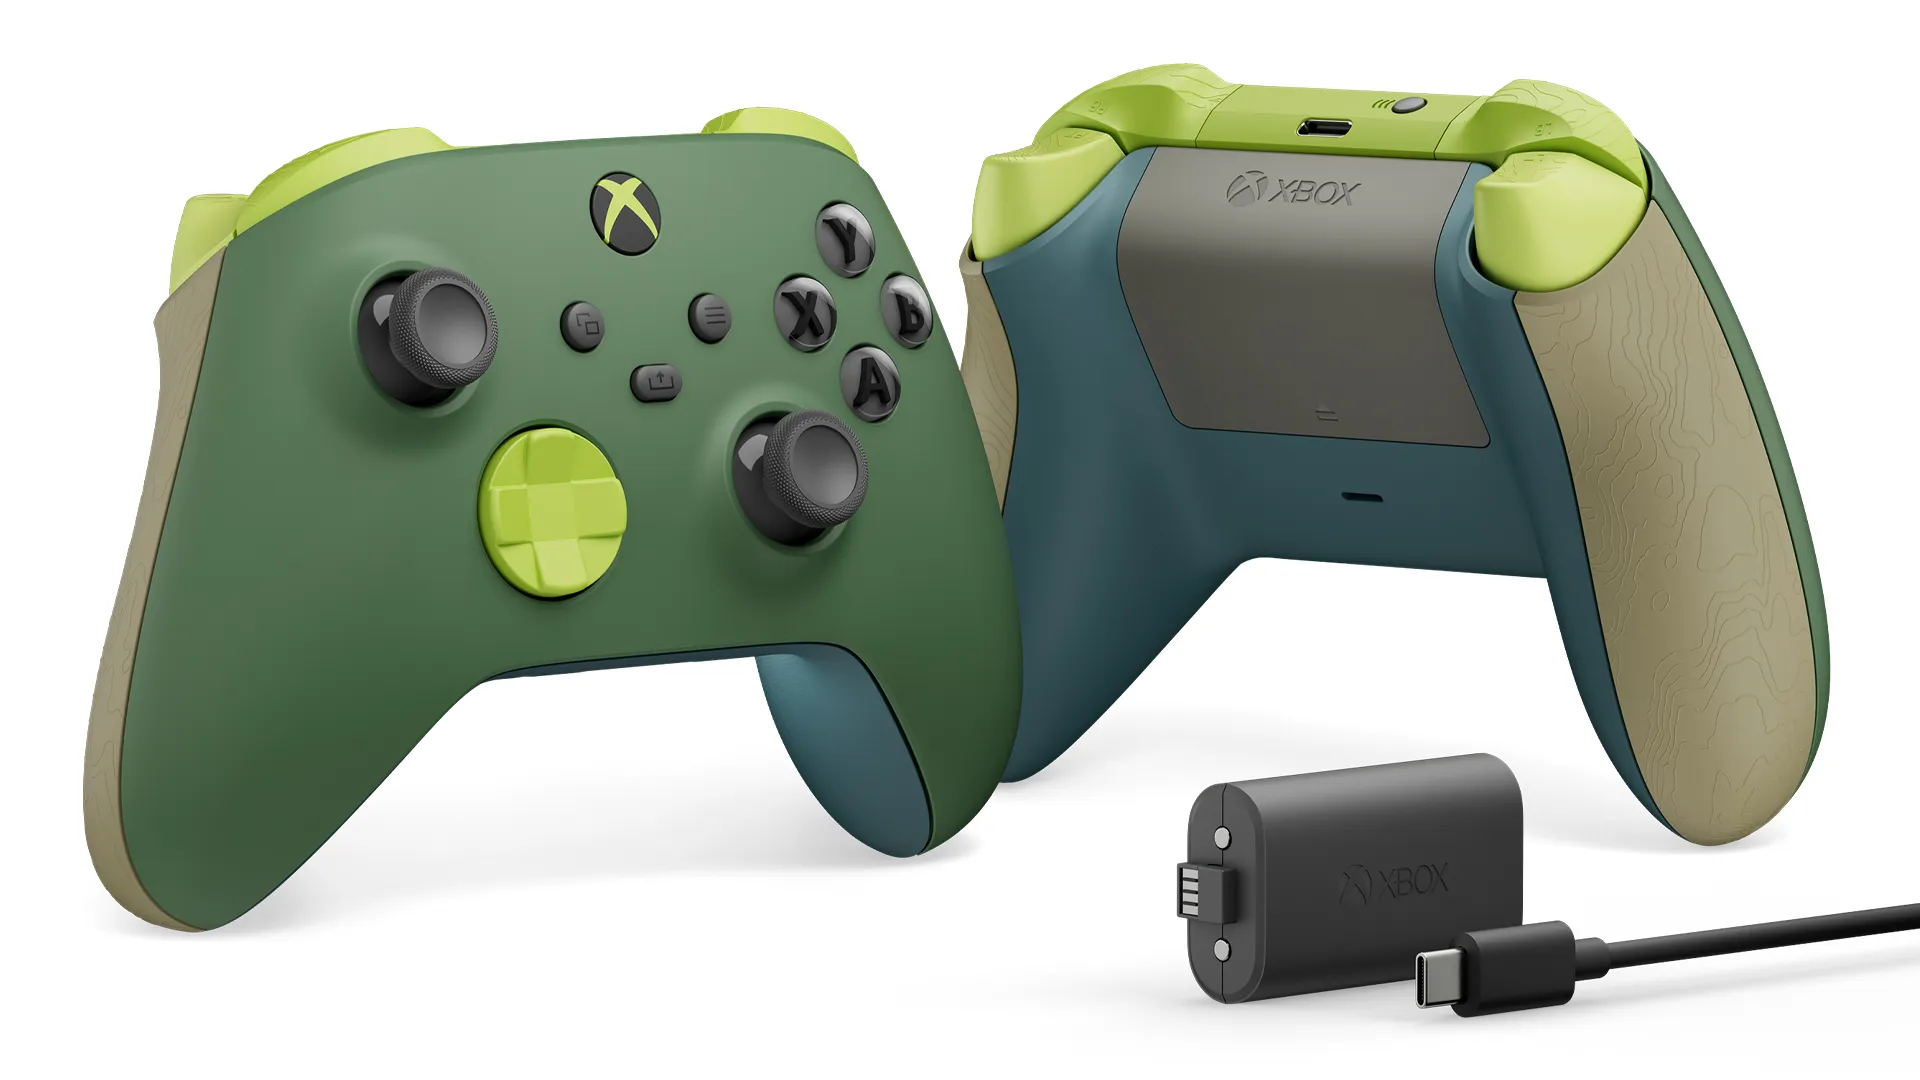 Microsoft’s latest sustainability effort is in the form of a new Xbox controller with earth-tone colors